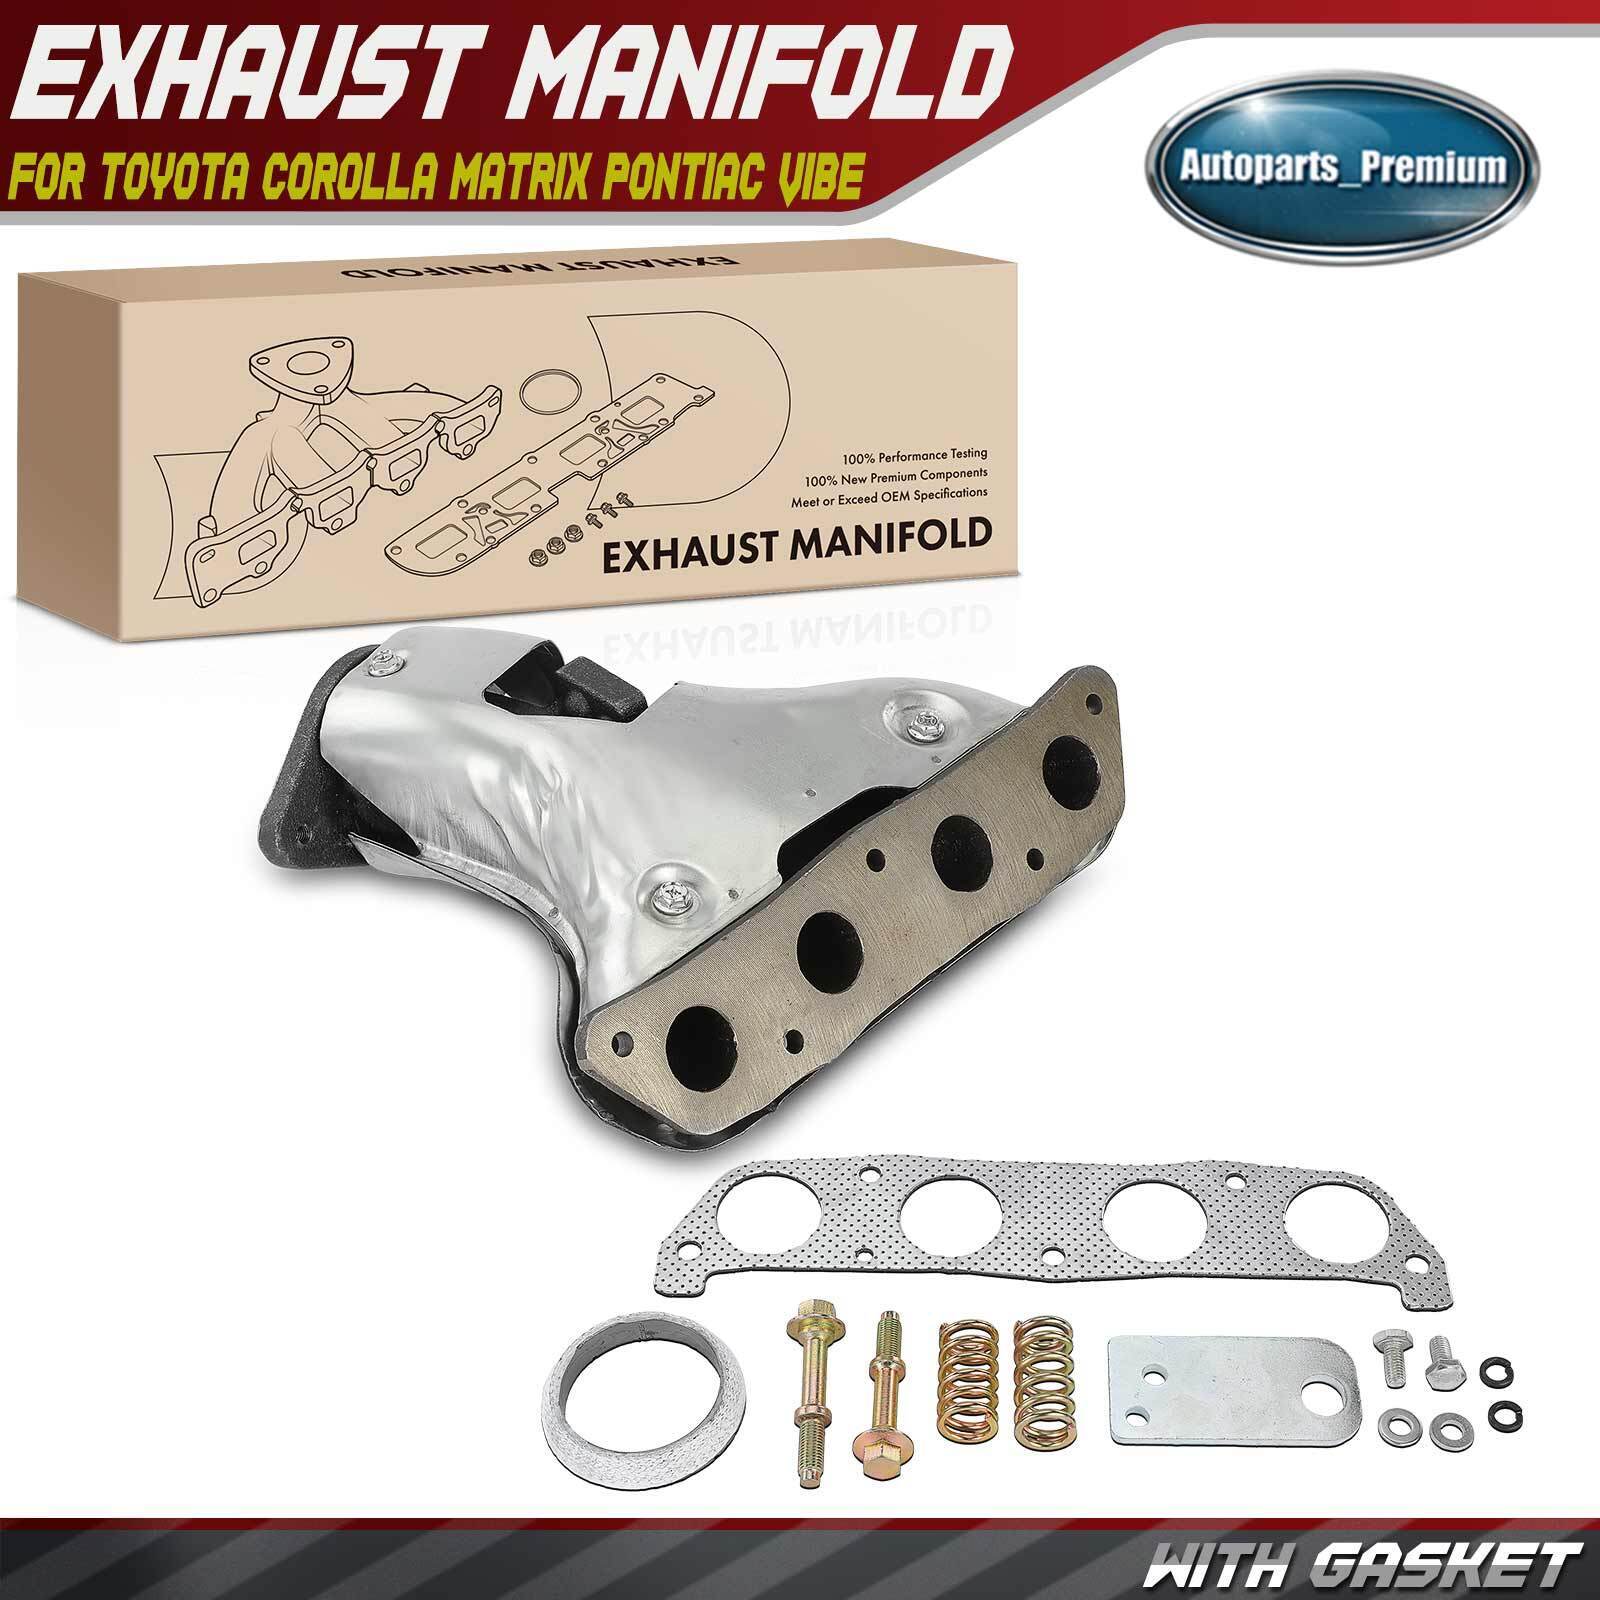 New Exhaust Manifold with Gasket for Toyota Corolla Matrix Pontiac Vibe L4 1.8L